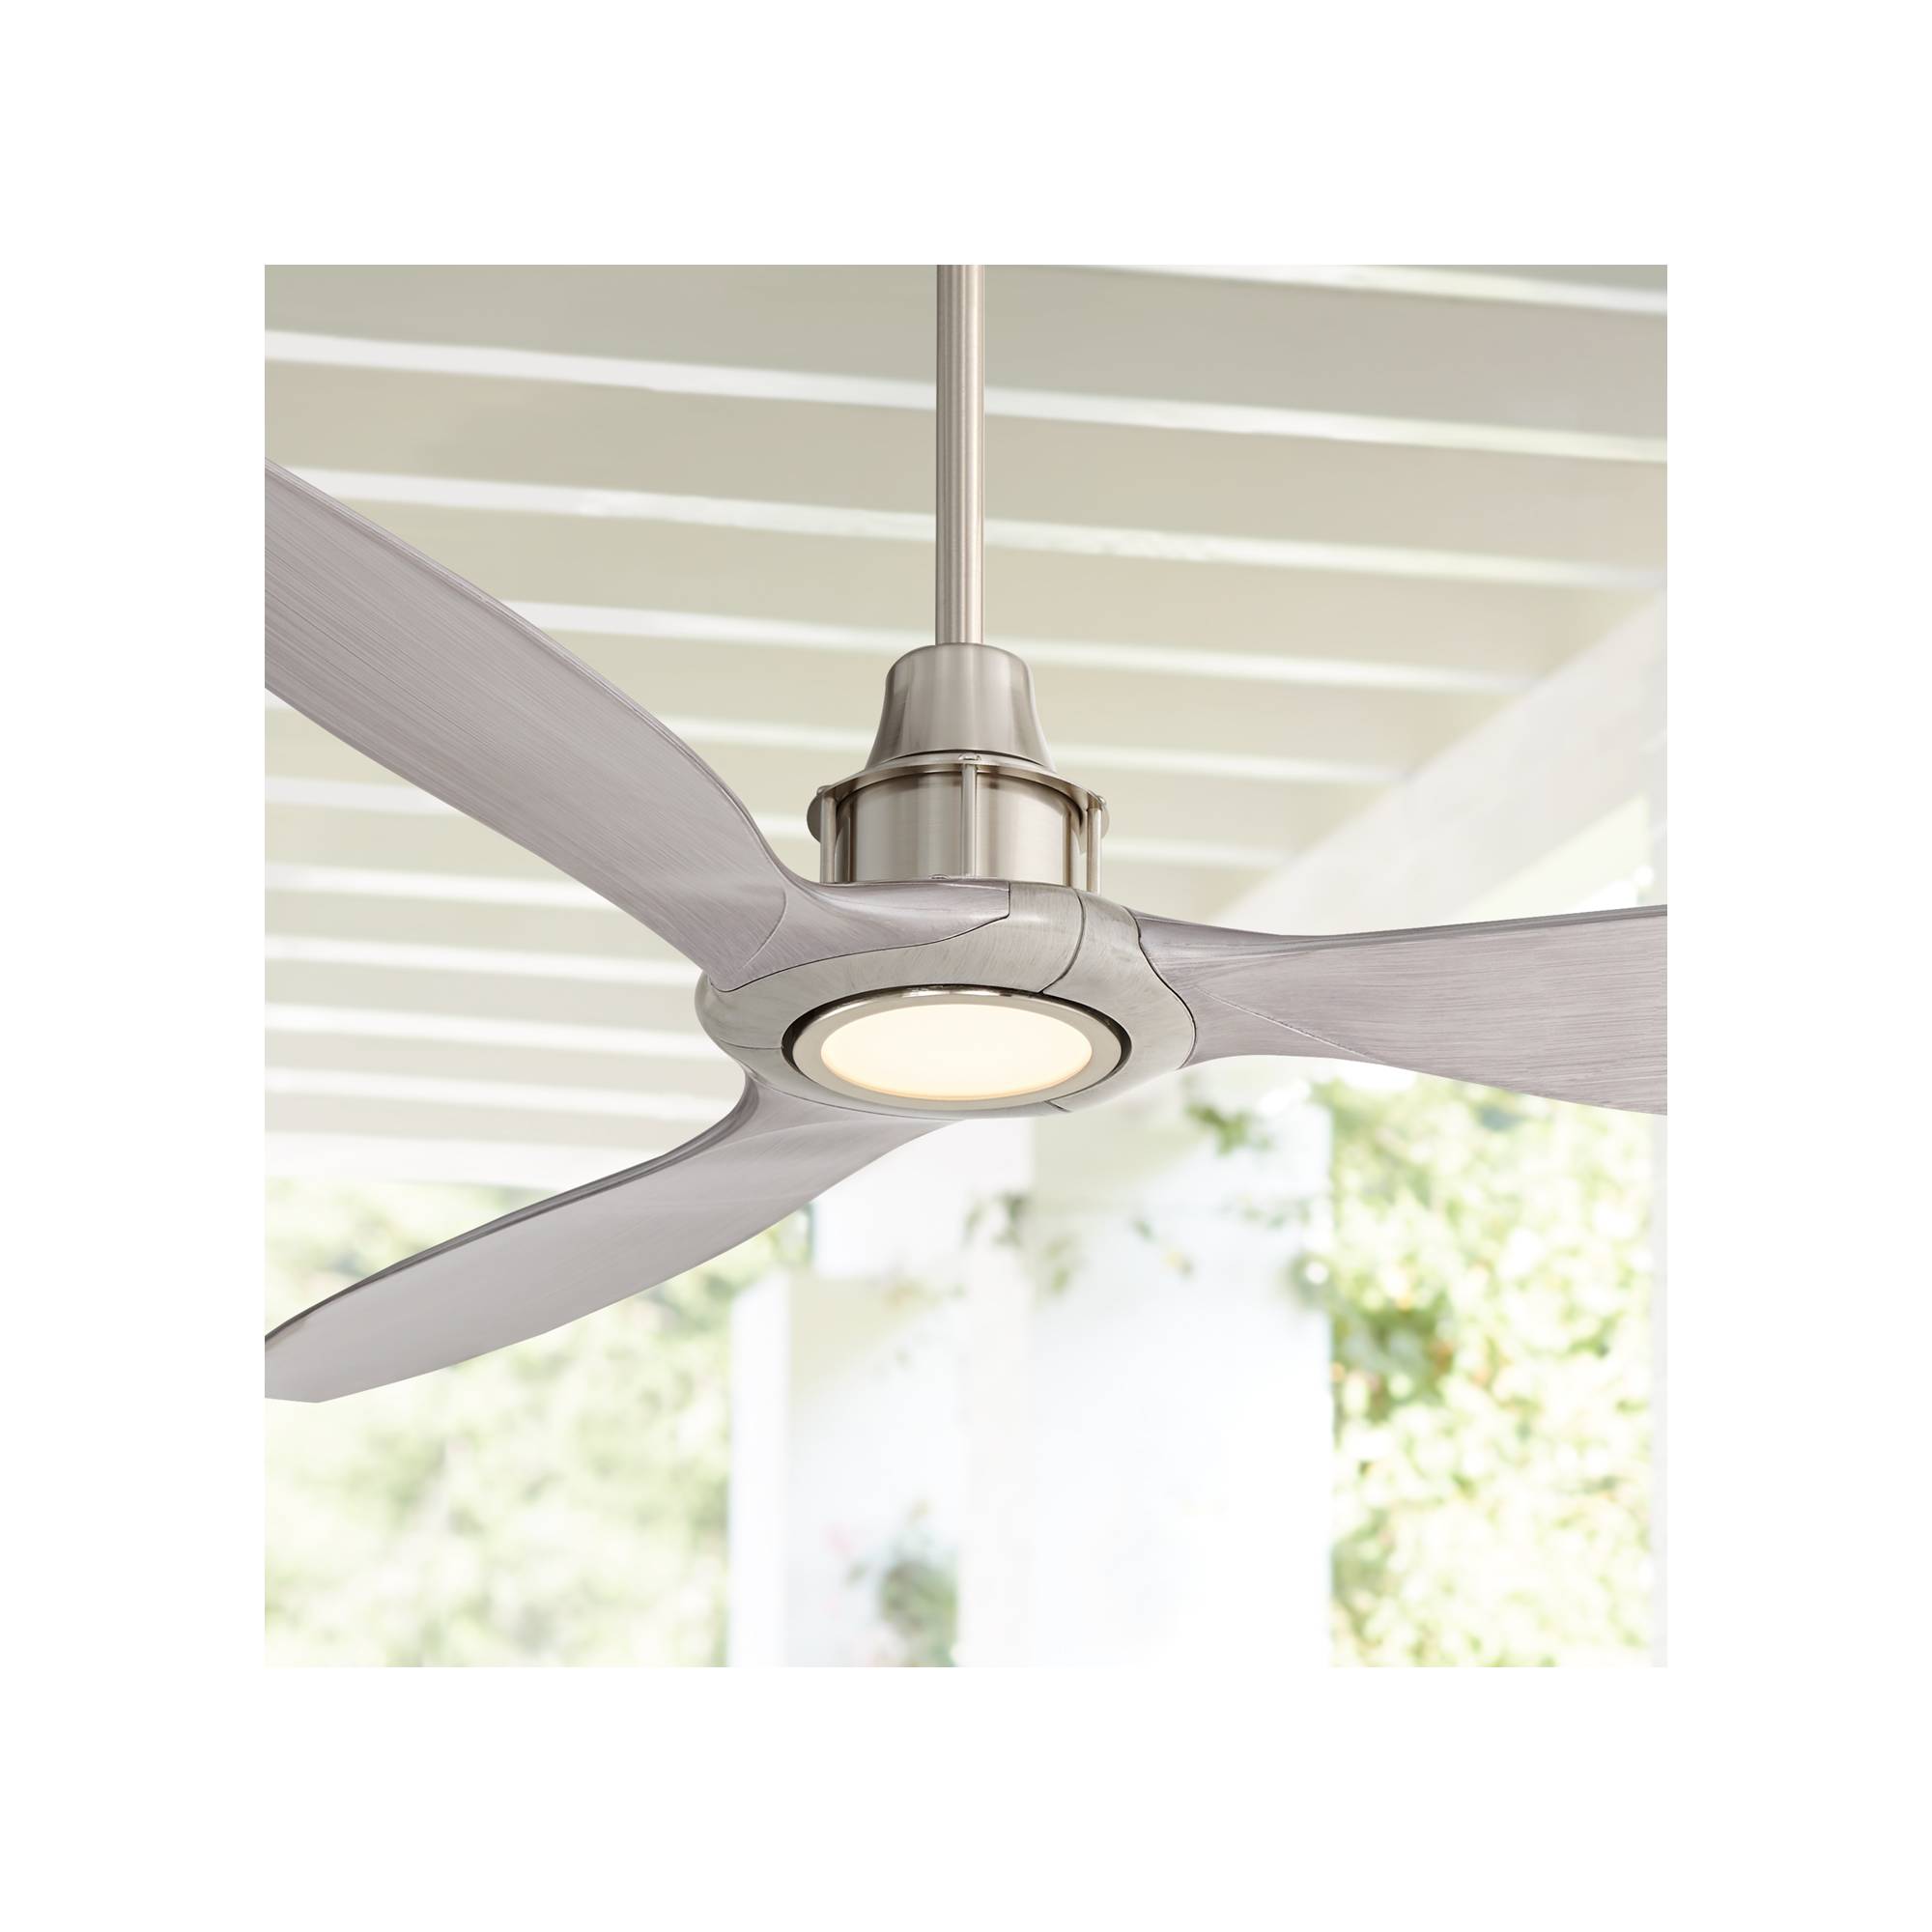 58 Outdoor Ceiling Fan With Light Led Remote Nickel Damp Rated